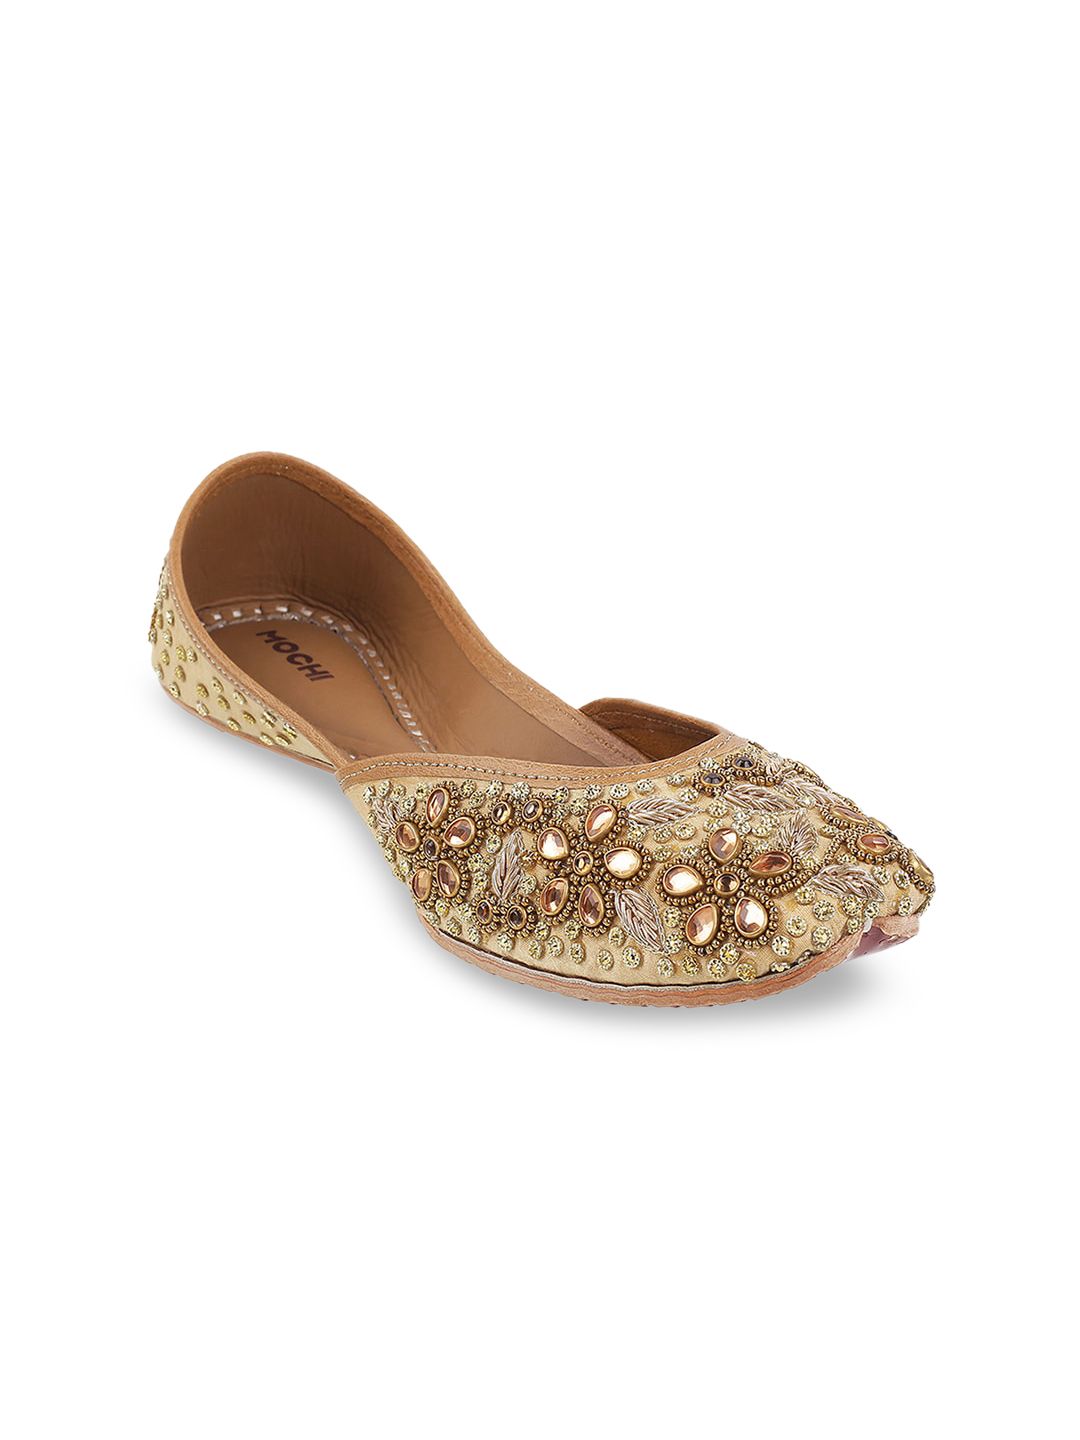 Mochi Women Gold-Toned Printed Mojaris Flats With Ethnic Embellishments Price in India